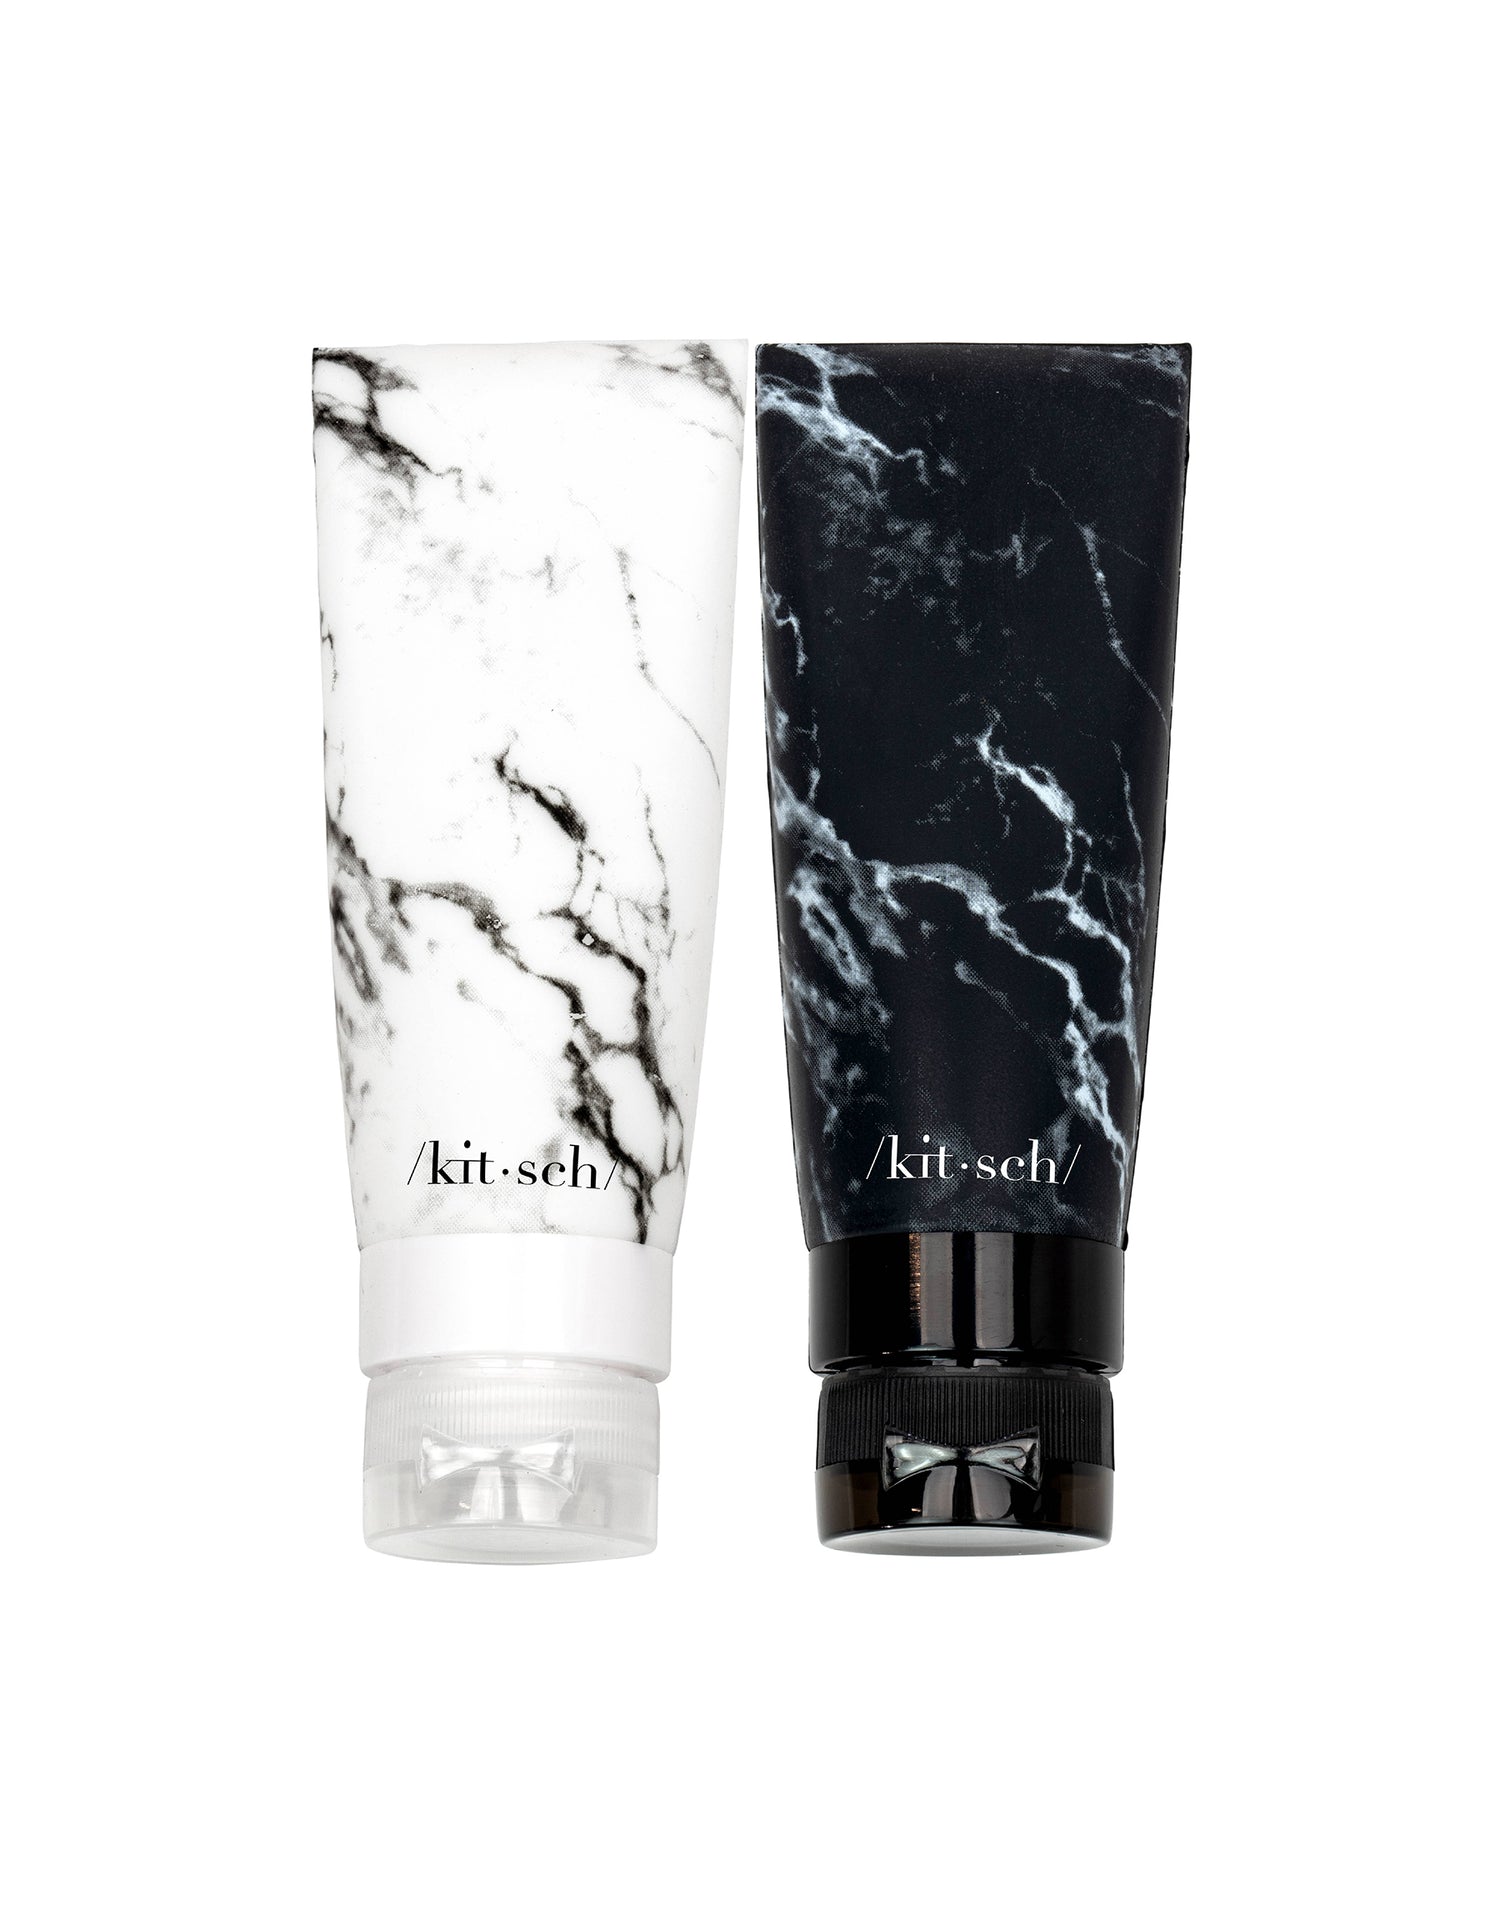 Kitsch's Refillable Silicone Bottle 2PC Set in Black/White Marble - Product View